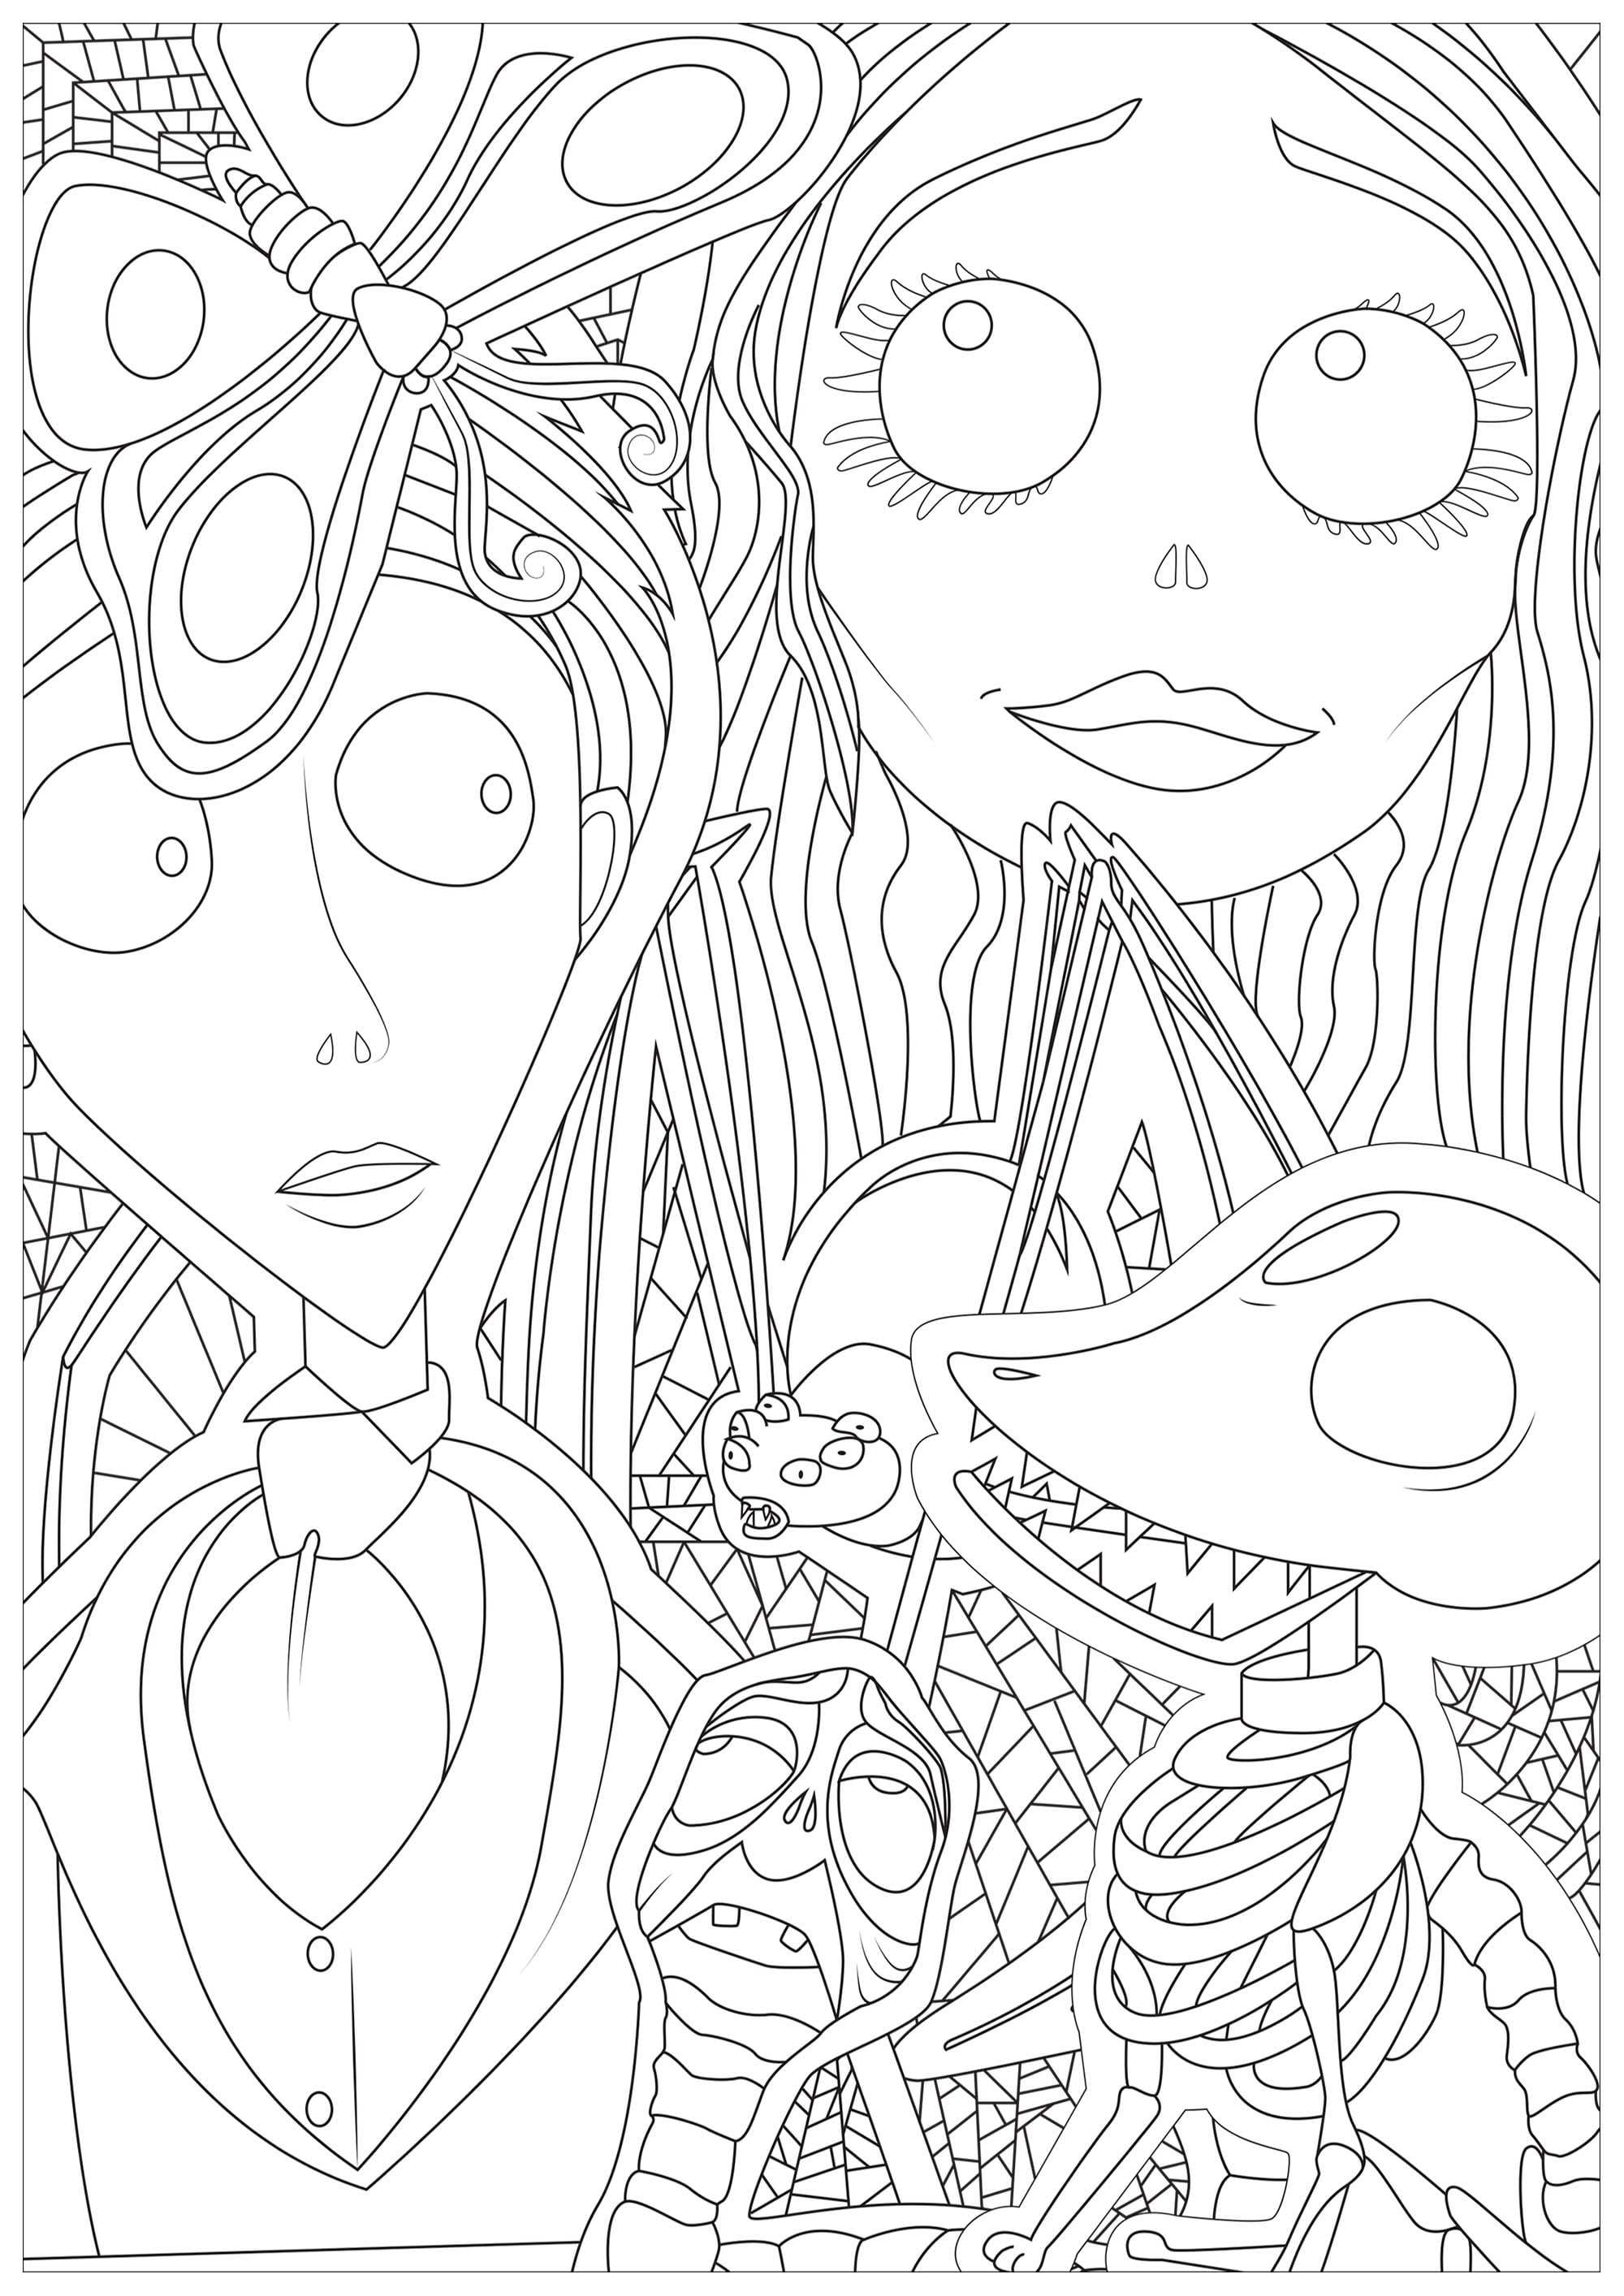 Corpse Bride Printable   Printable Halloween Coloring Pages For ...